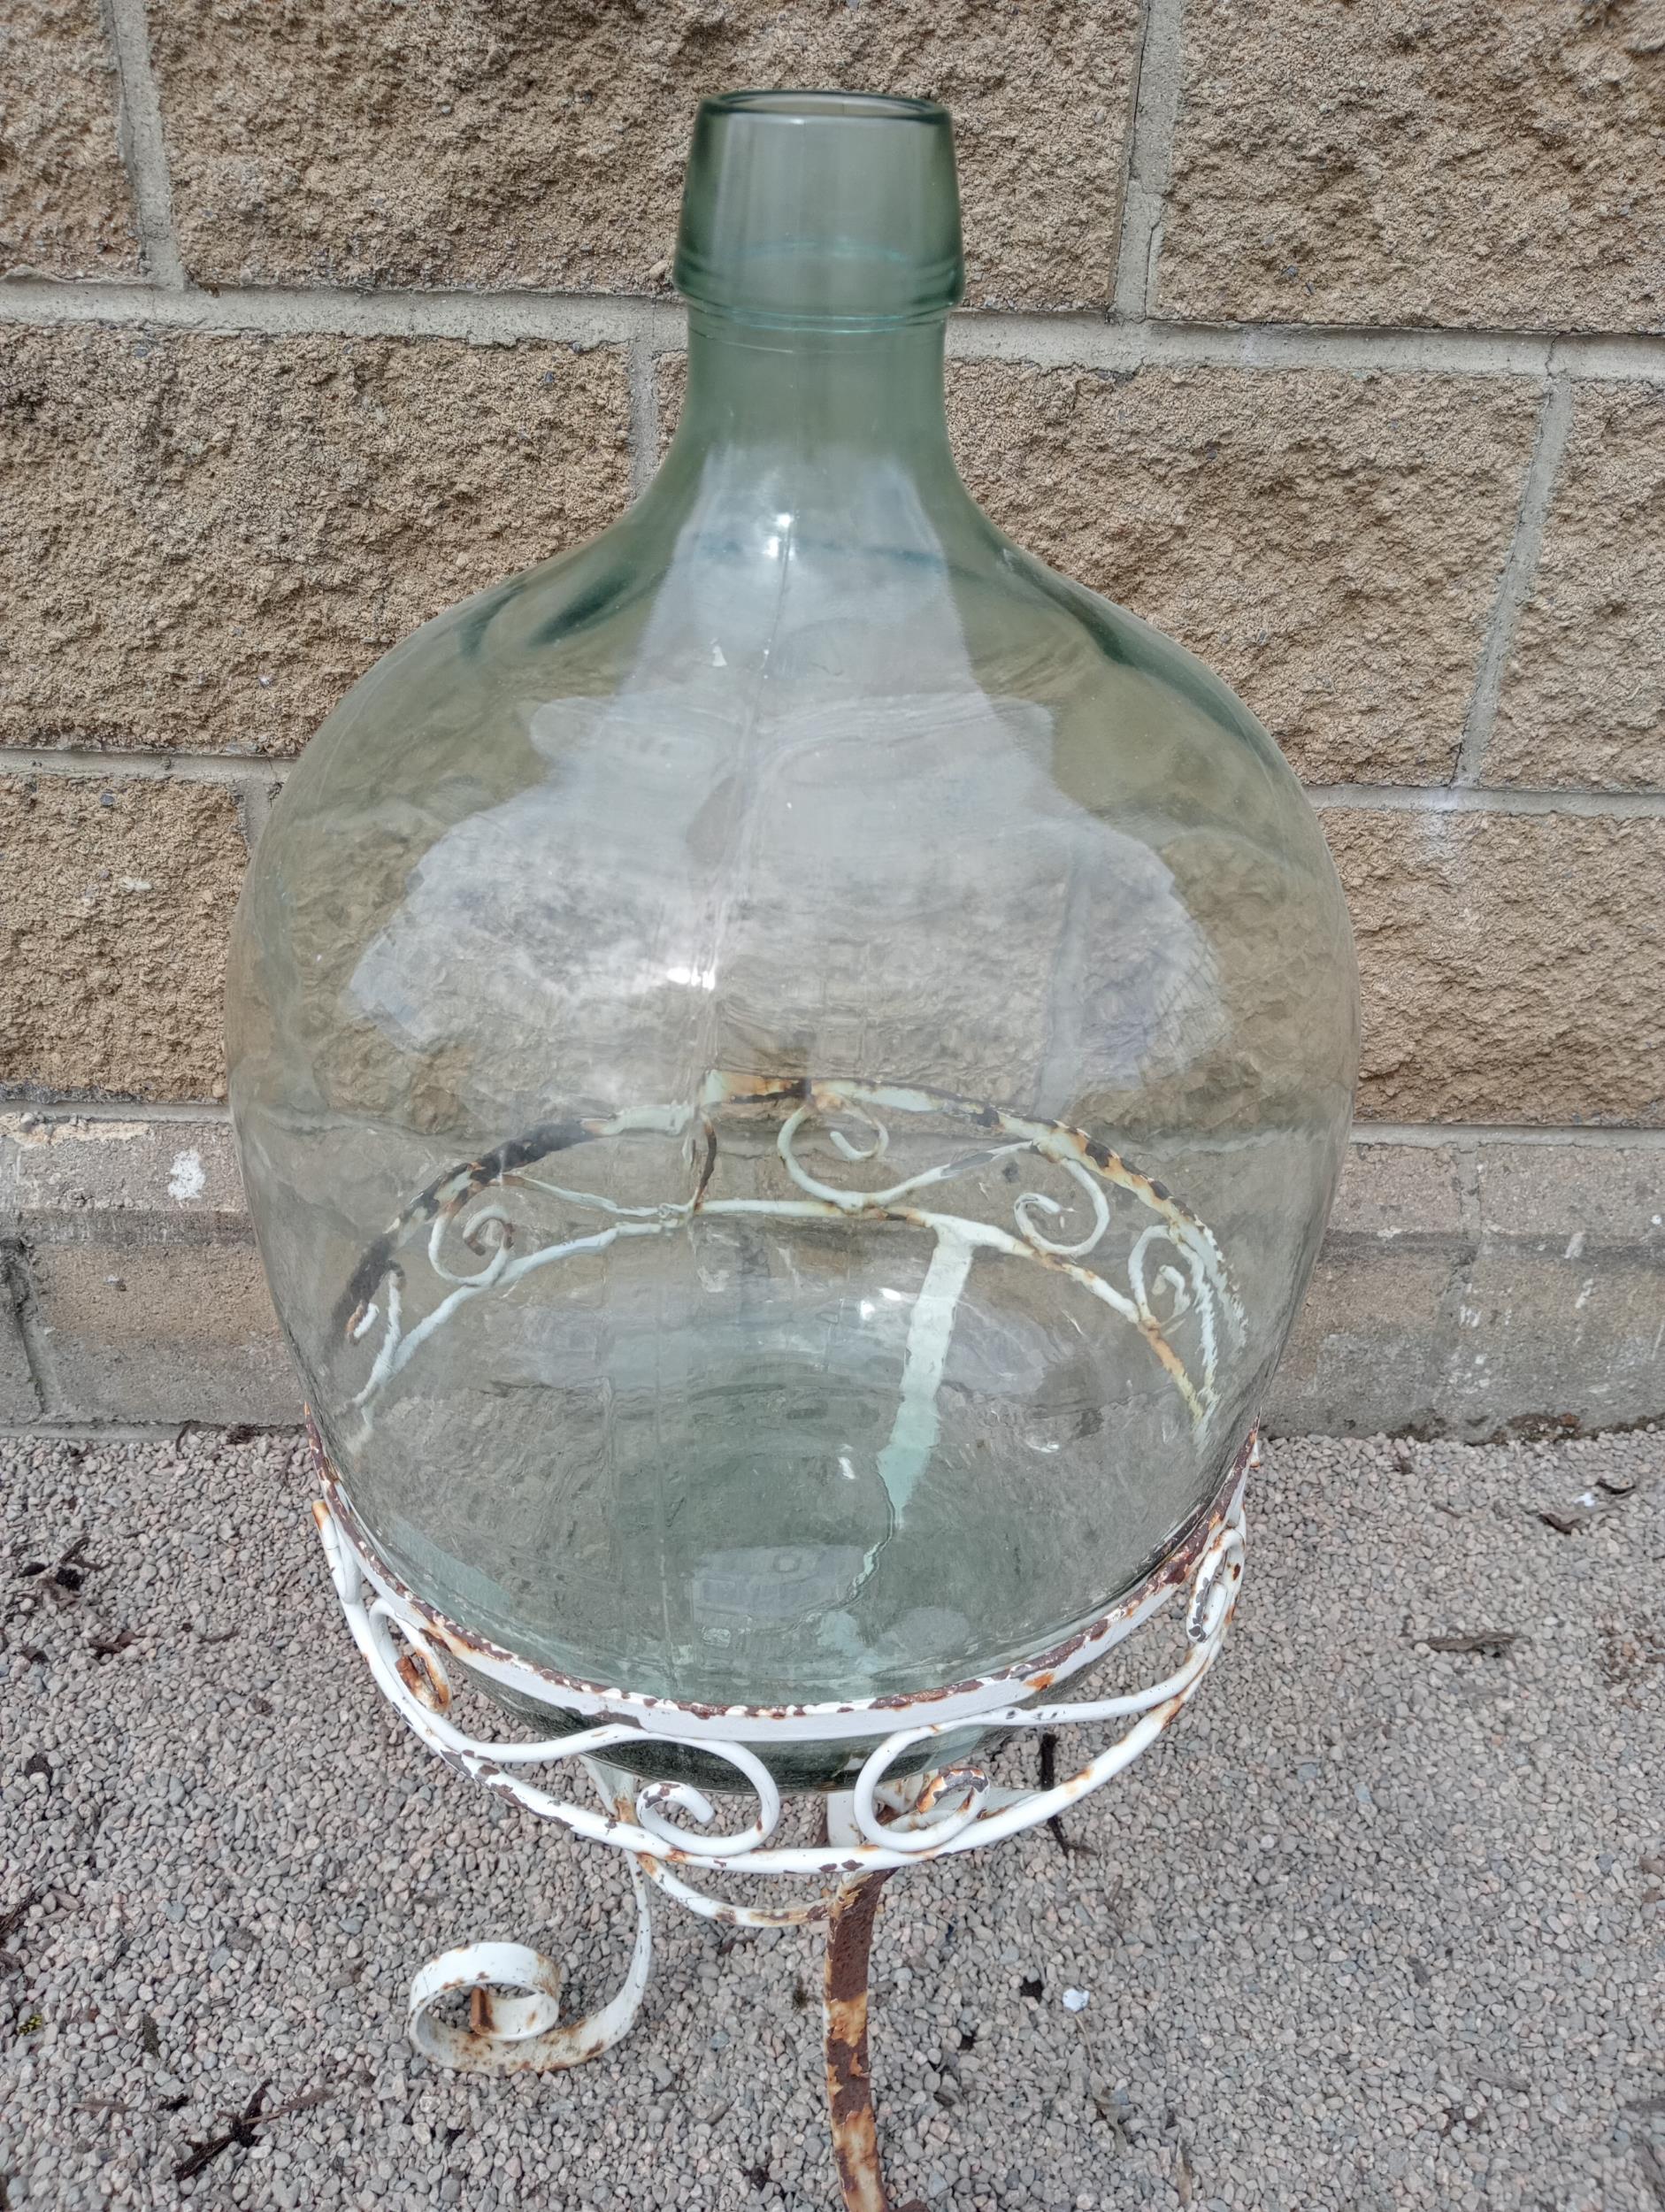 Glass carboy raised on metal stand {H 90cm x Dia 35cm }. (NOT AVAILABLE TO VIEW IN PERSON) - Bild 3 aus 3